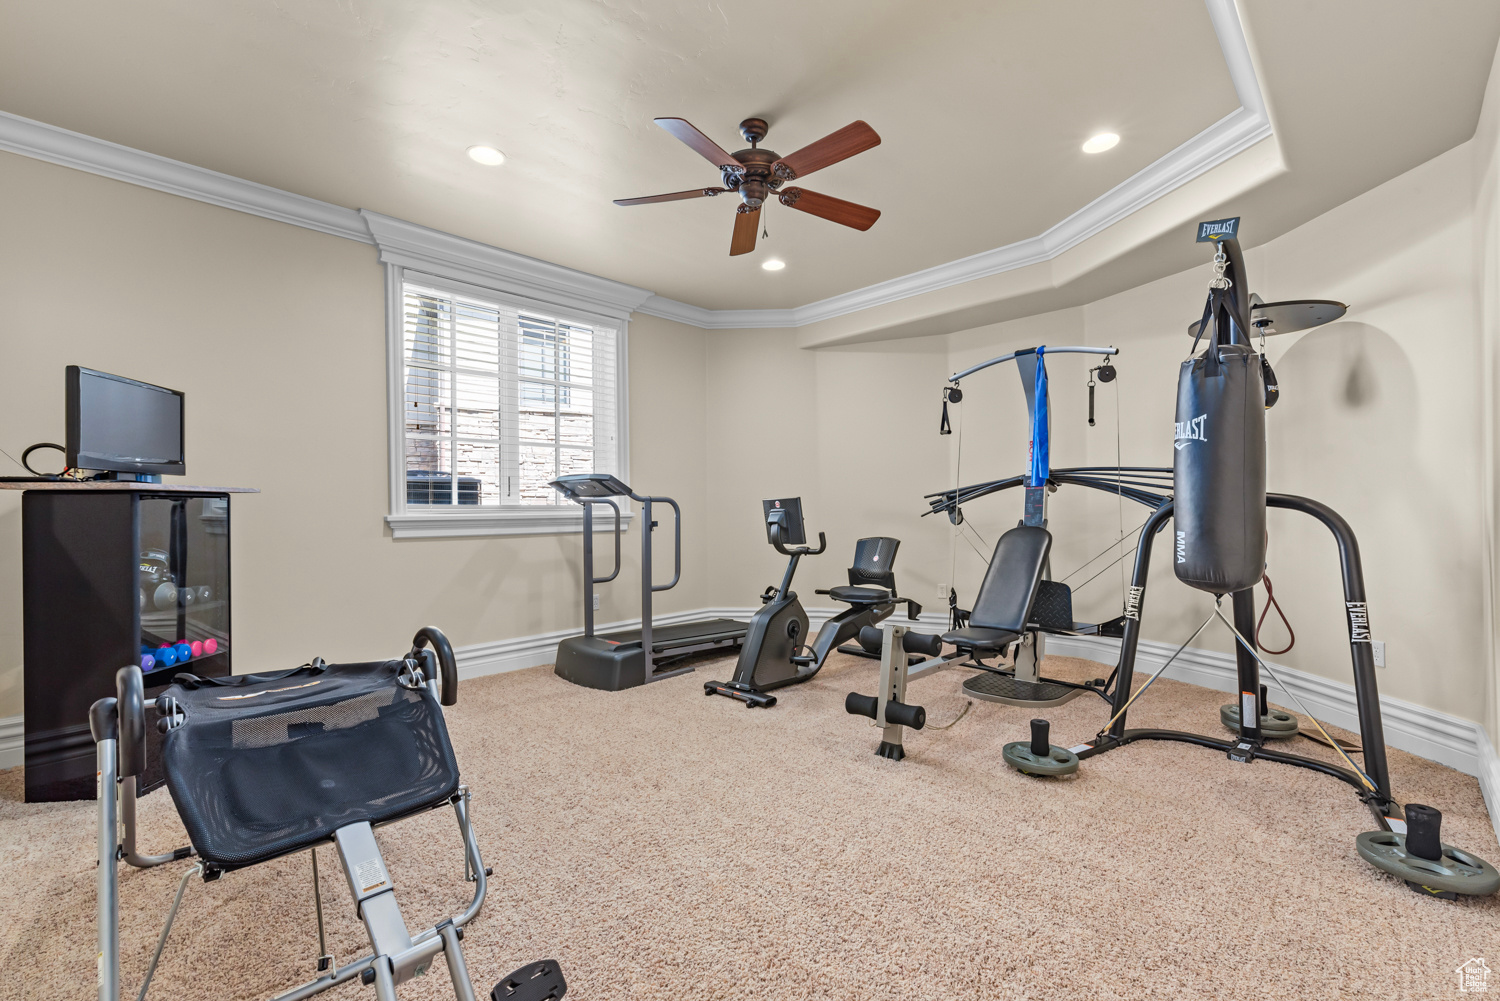 Bedroom 5, currently being used as a workout room